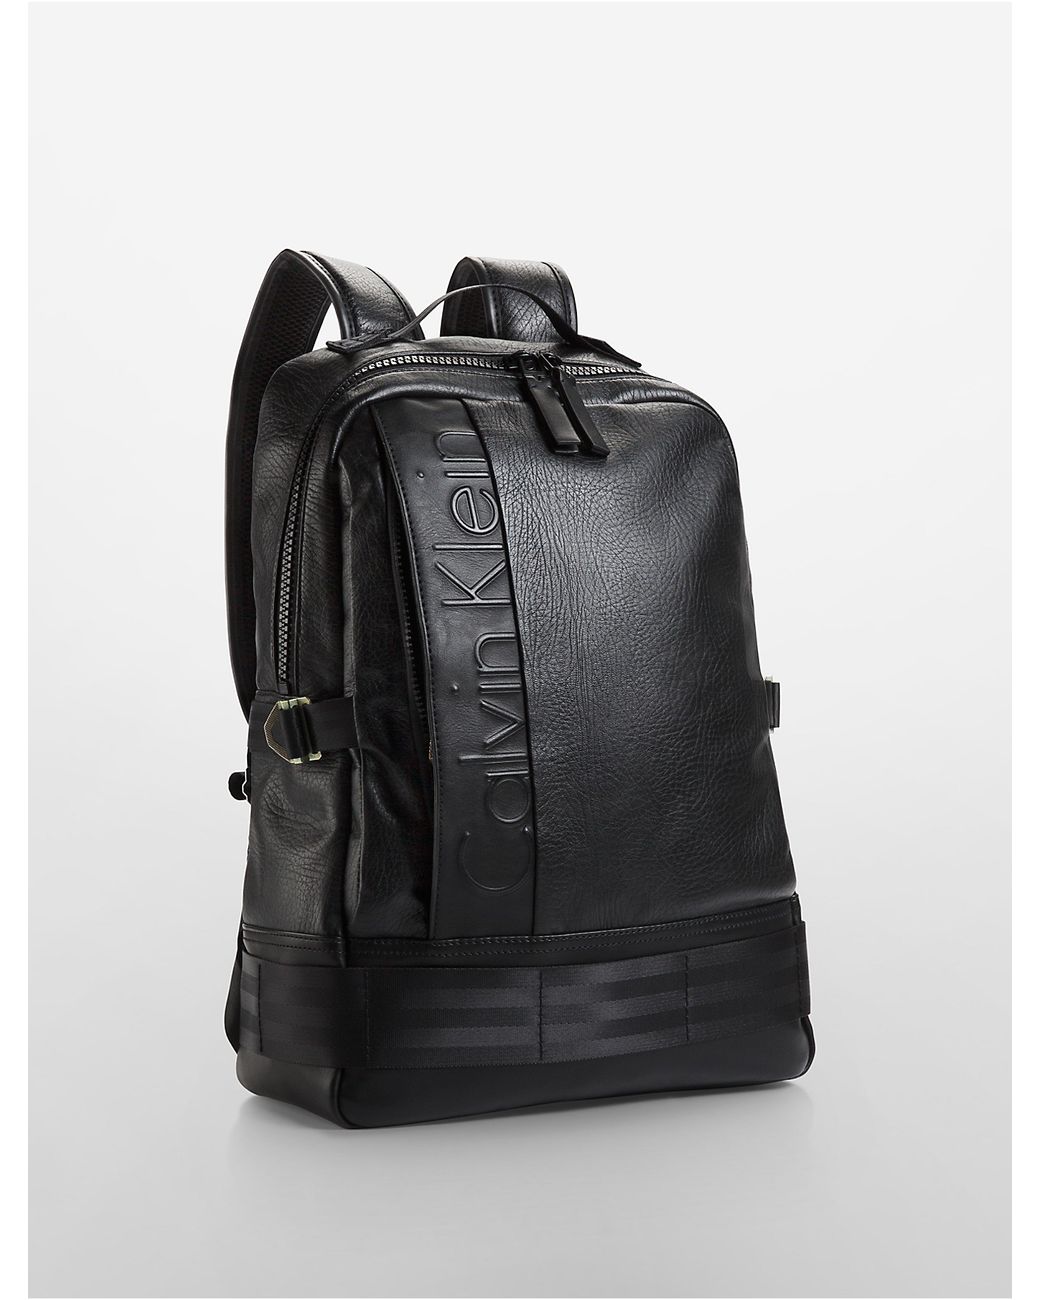 Calvin Klein Jeans Pilot Leather Backpack in Black | Lyst